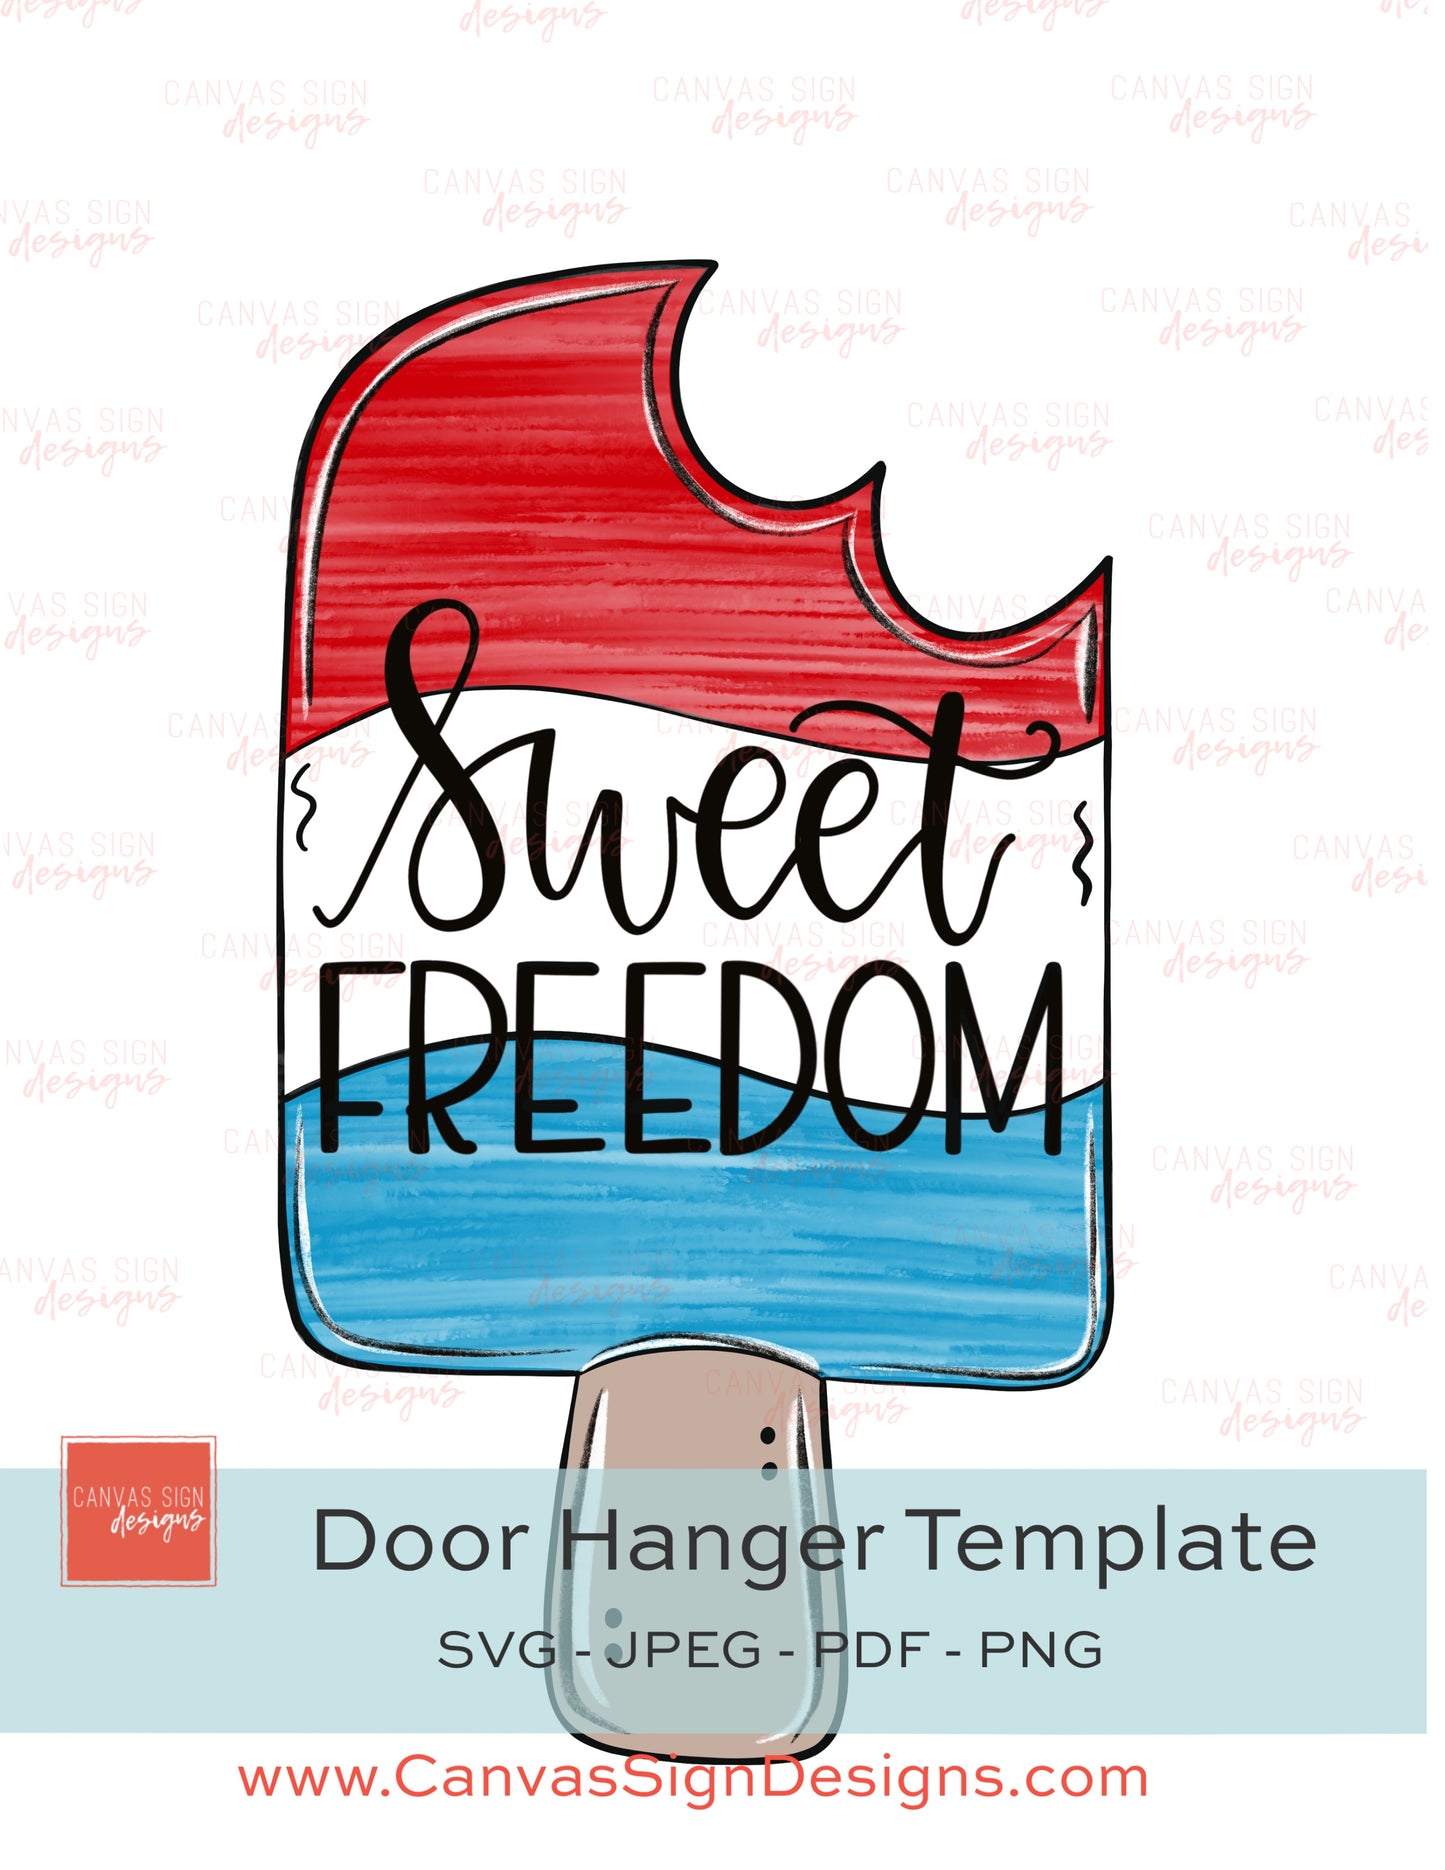 Red, White, and Blue Popsicle Door Hanger Template